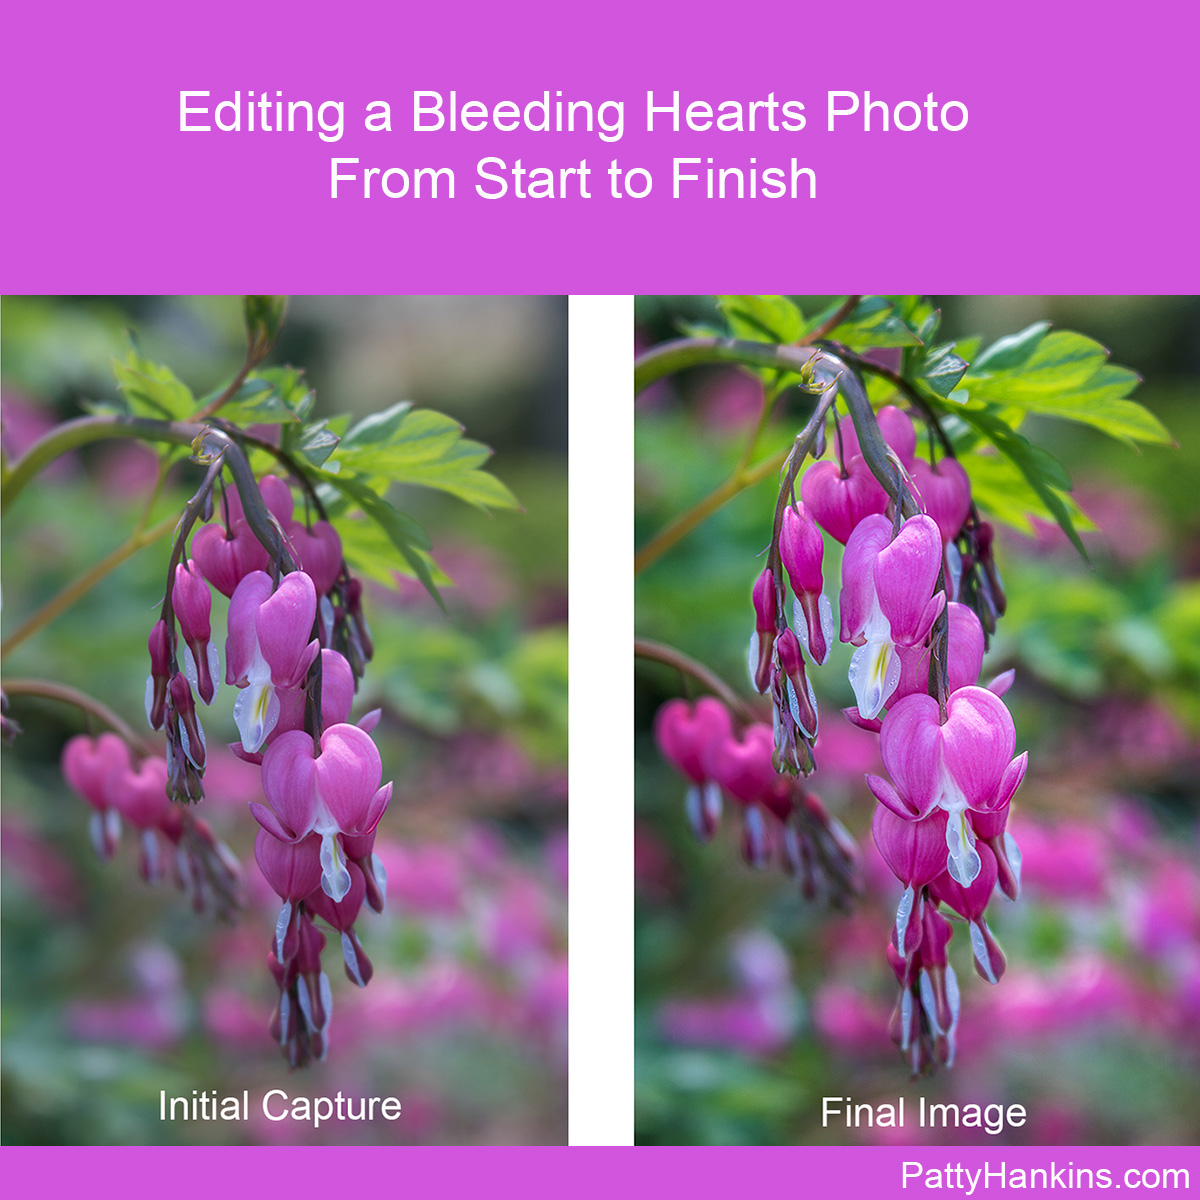 Editing a Bleeding Hearts photo from Start to Finish